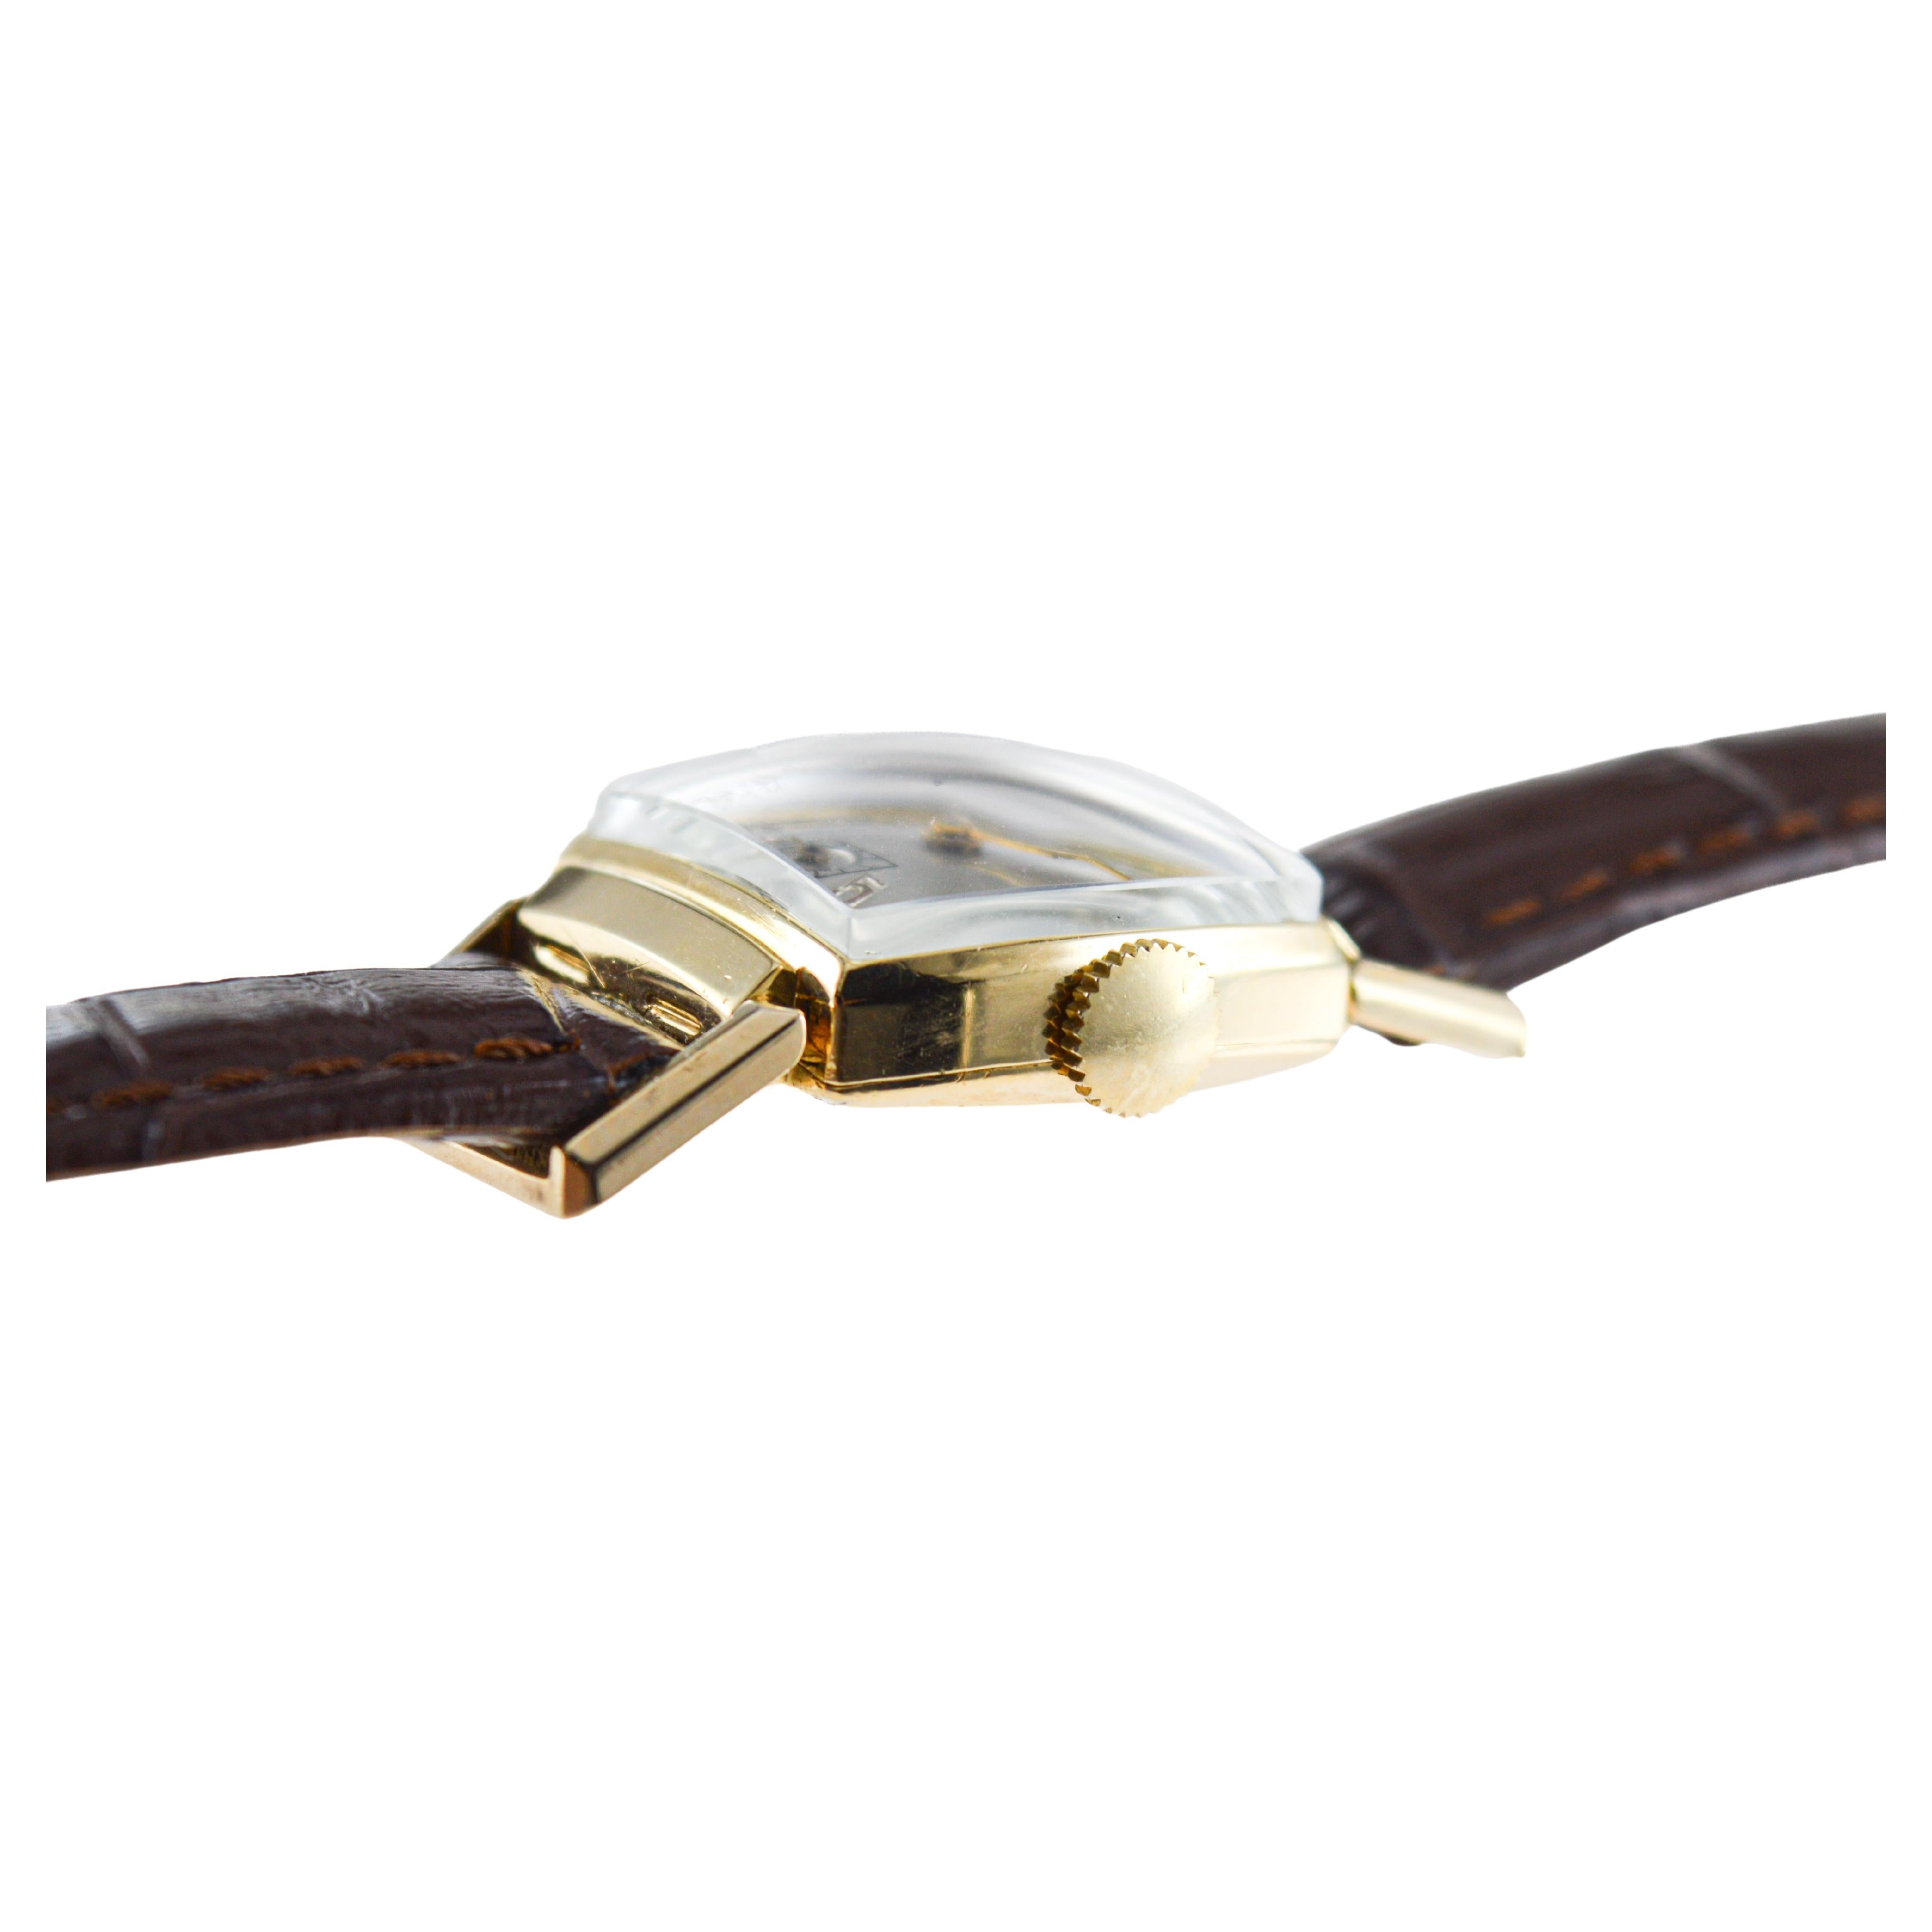 Buren Gold Filled Art Deco Watch with Articulated Lugs From the 1940's For Sale 3